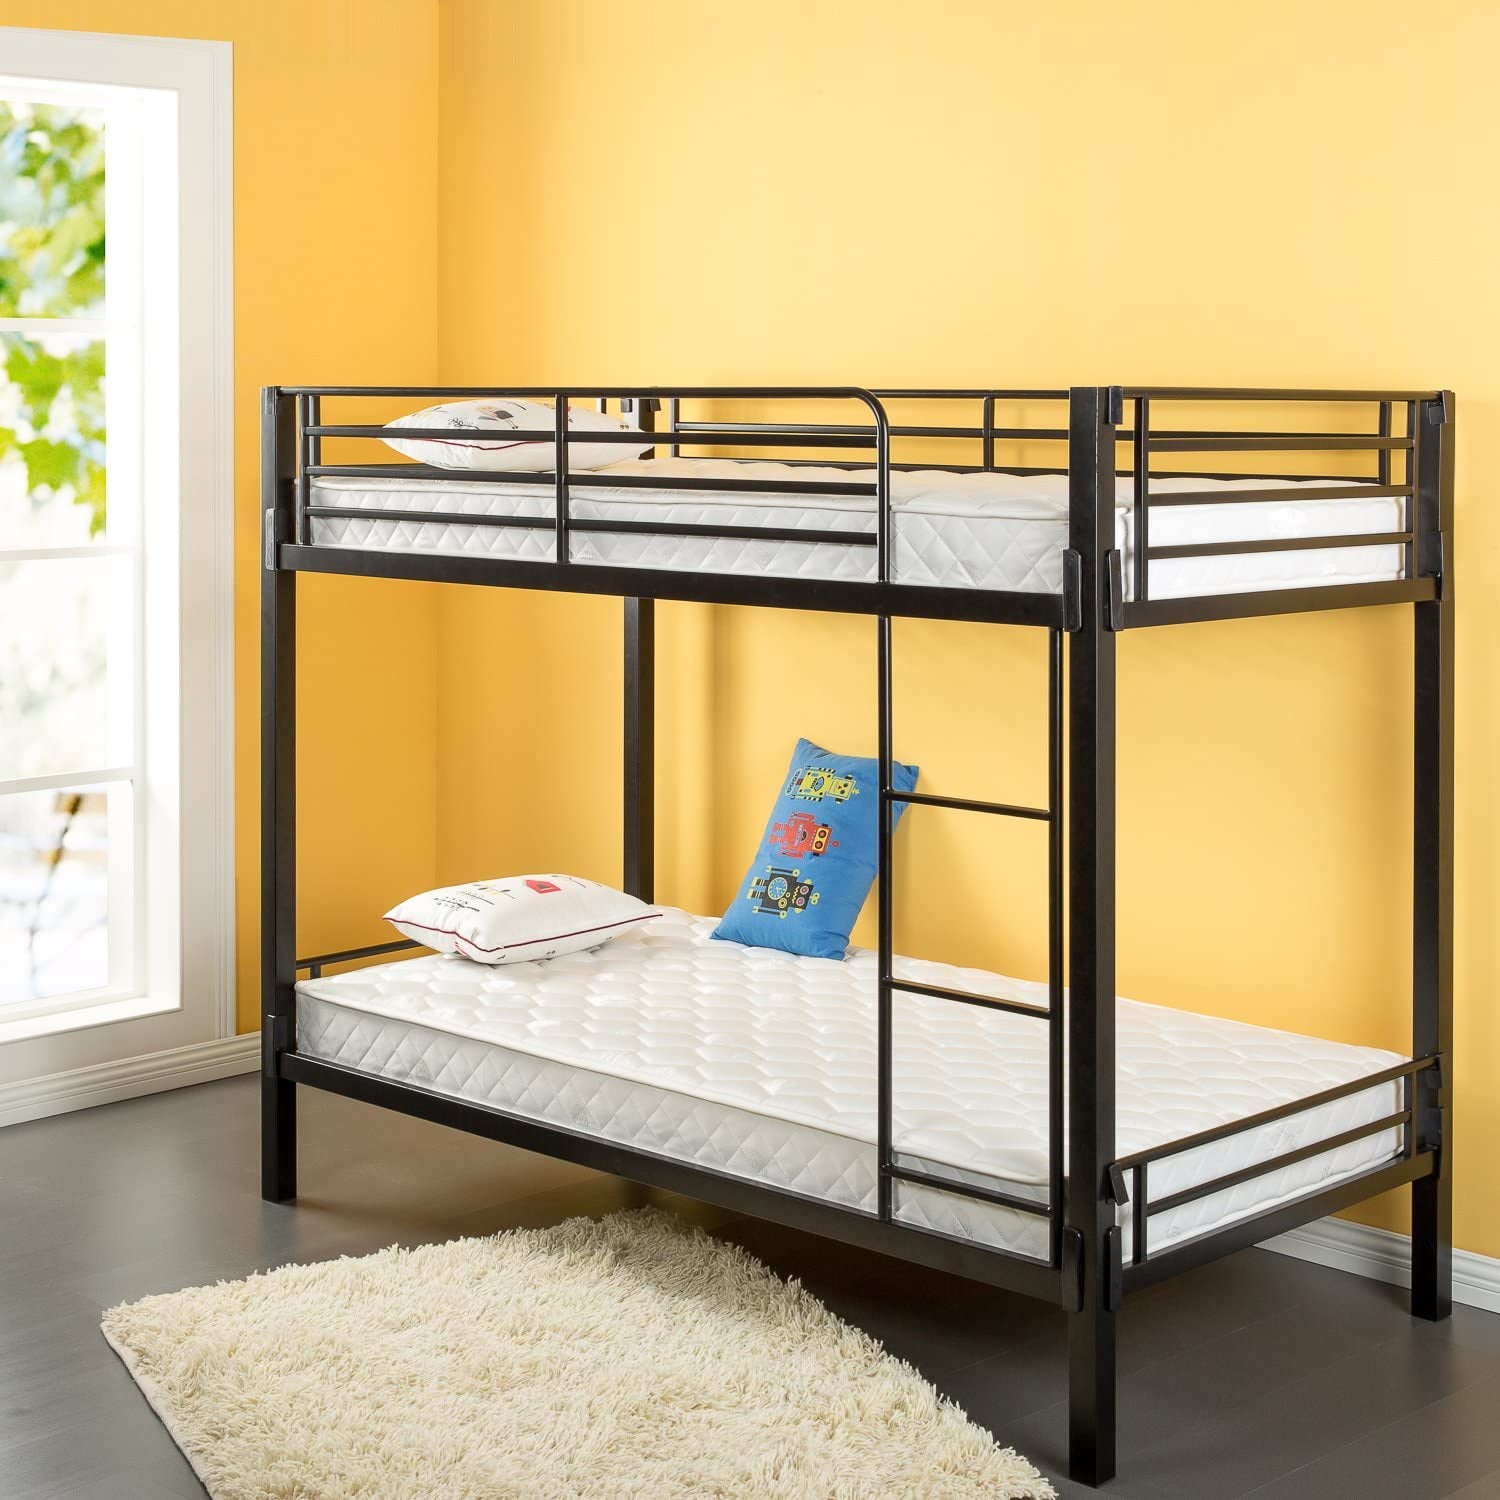 Zinus 6 Inch Foam And Spring Twin, Bunk Beds Sold With Mattresses